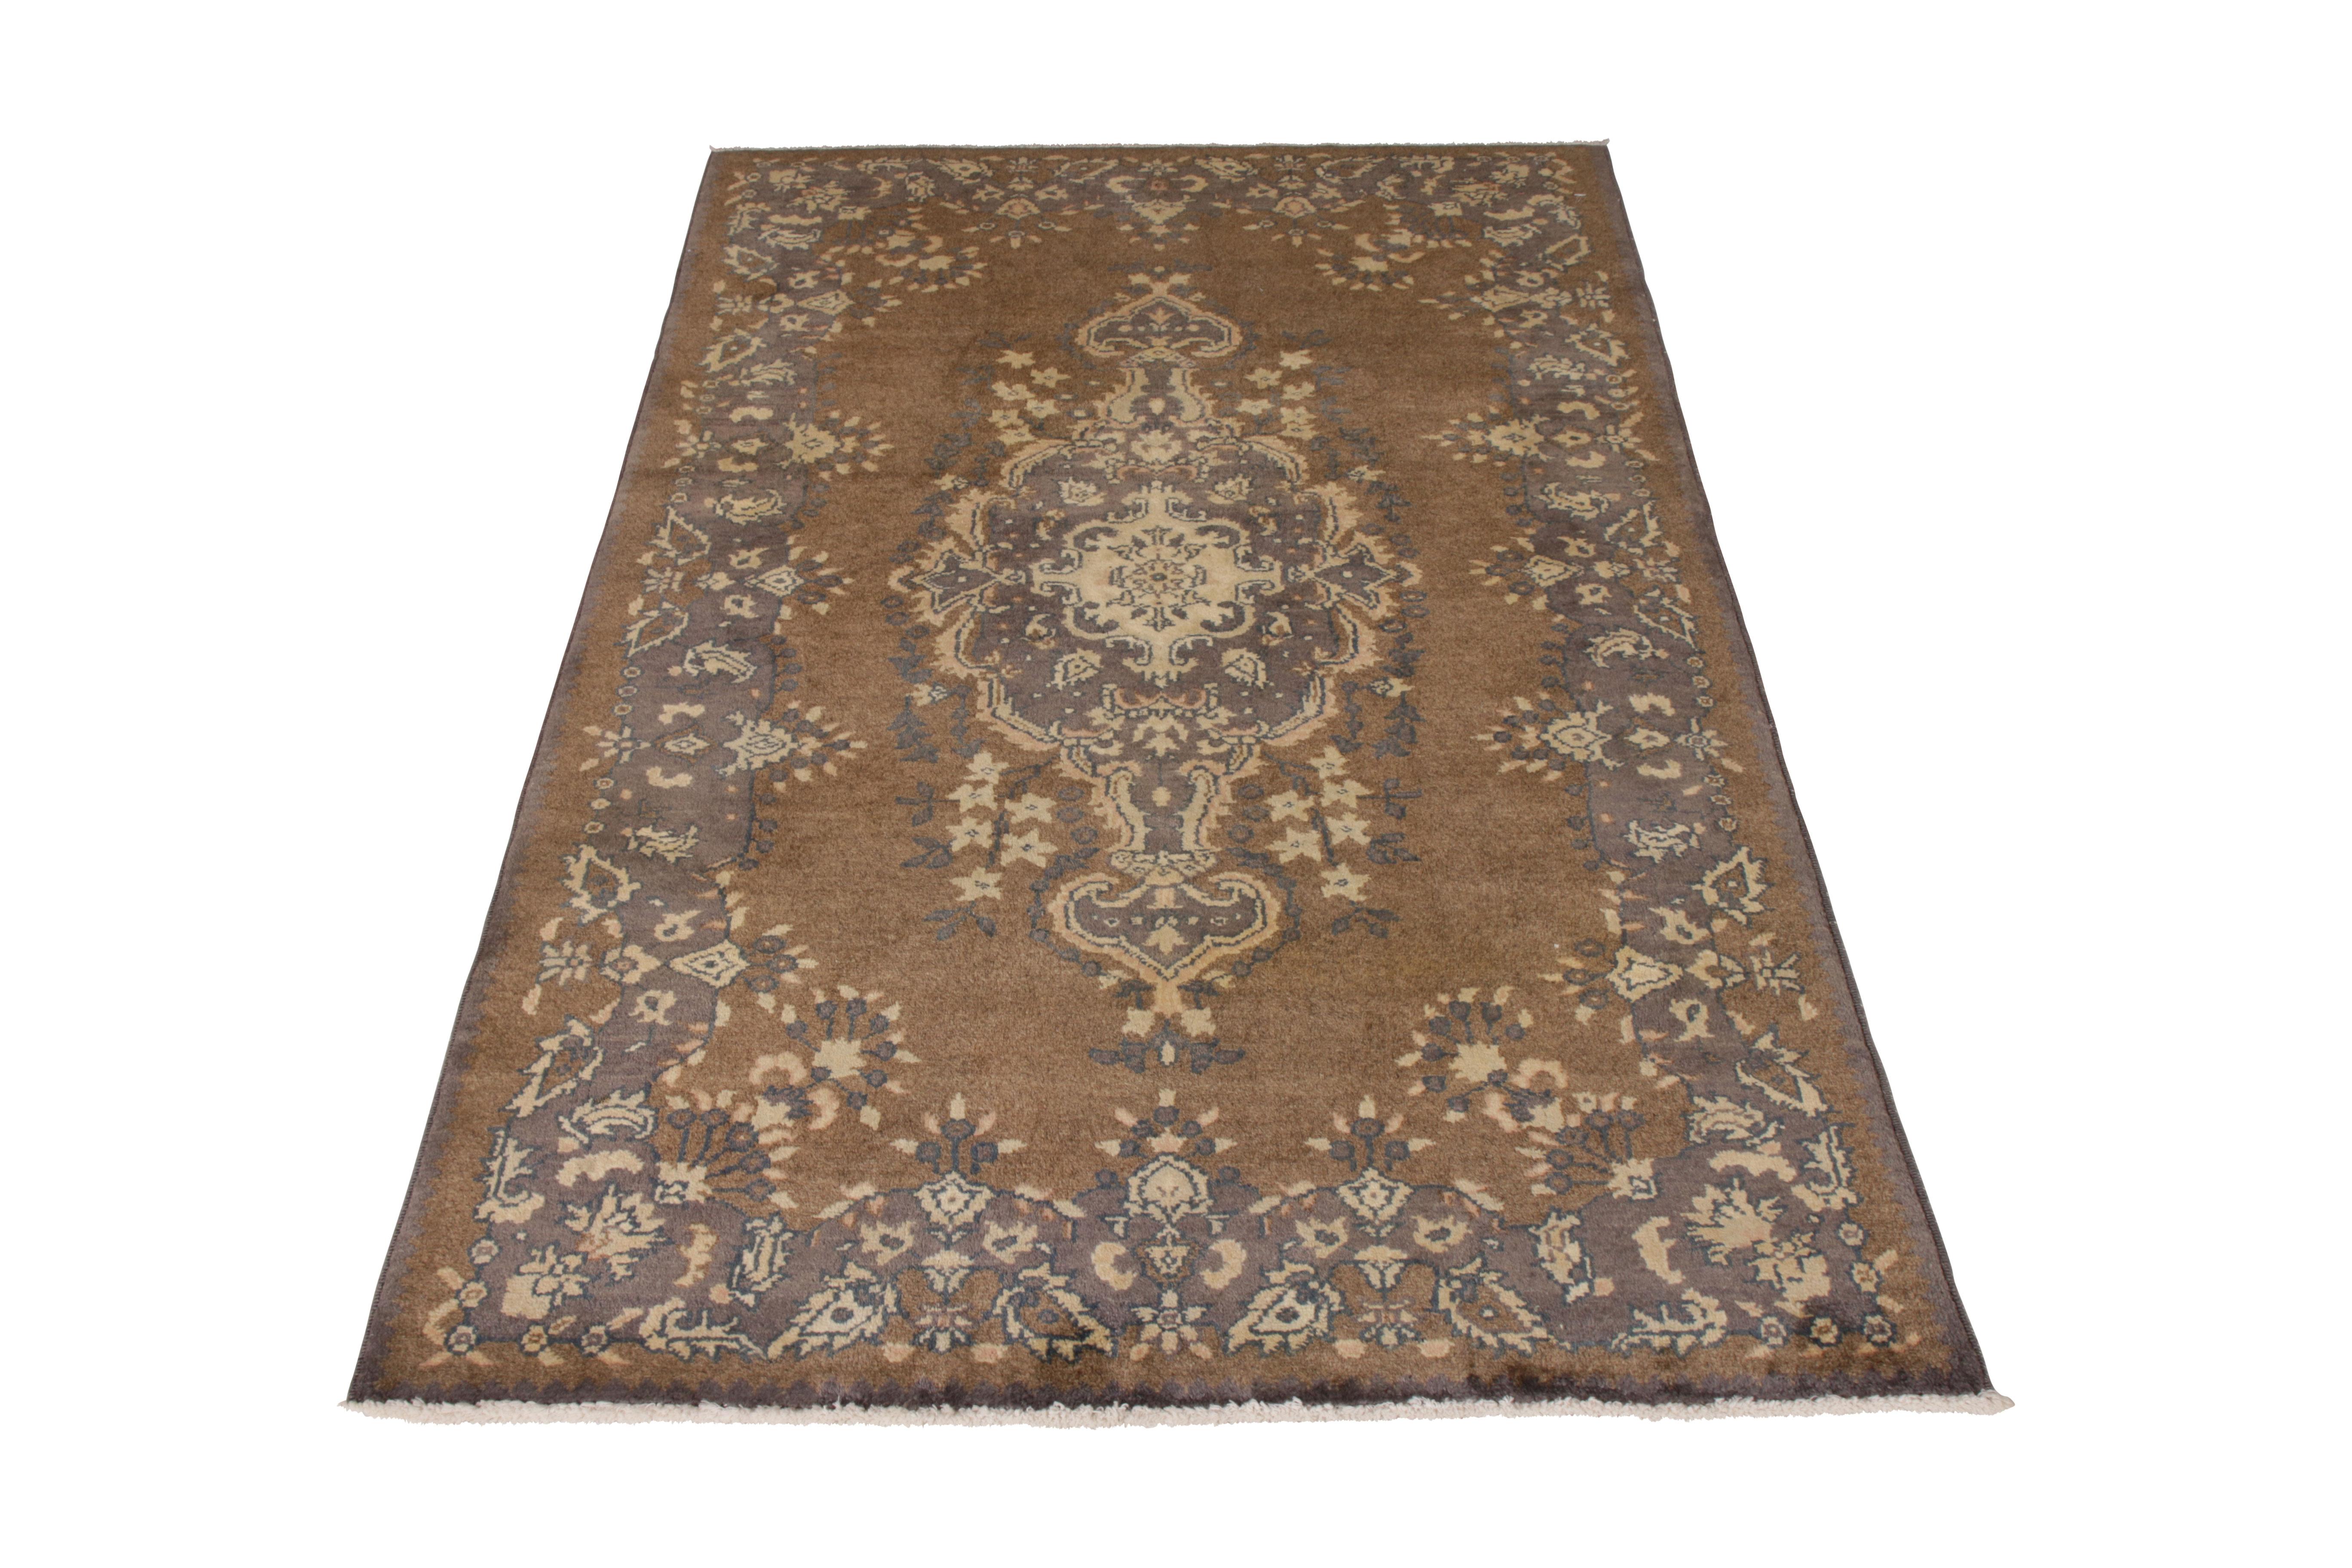 A 4x6 vintage rug of Sivas design, hand-knotted in wool originating from Turkey circa 1950-1960. A rare sibling of two 4x6 pieces, both in variations of this comfortable beige-brown, blue, and purple play. Available individually and together upon